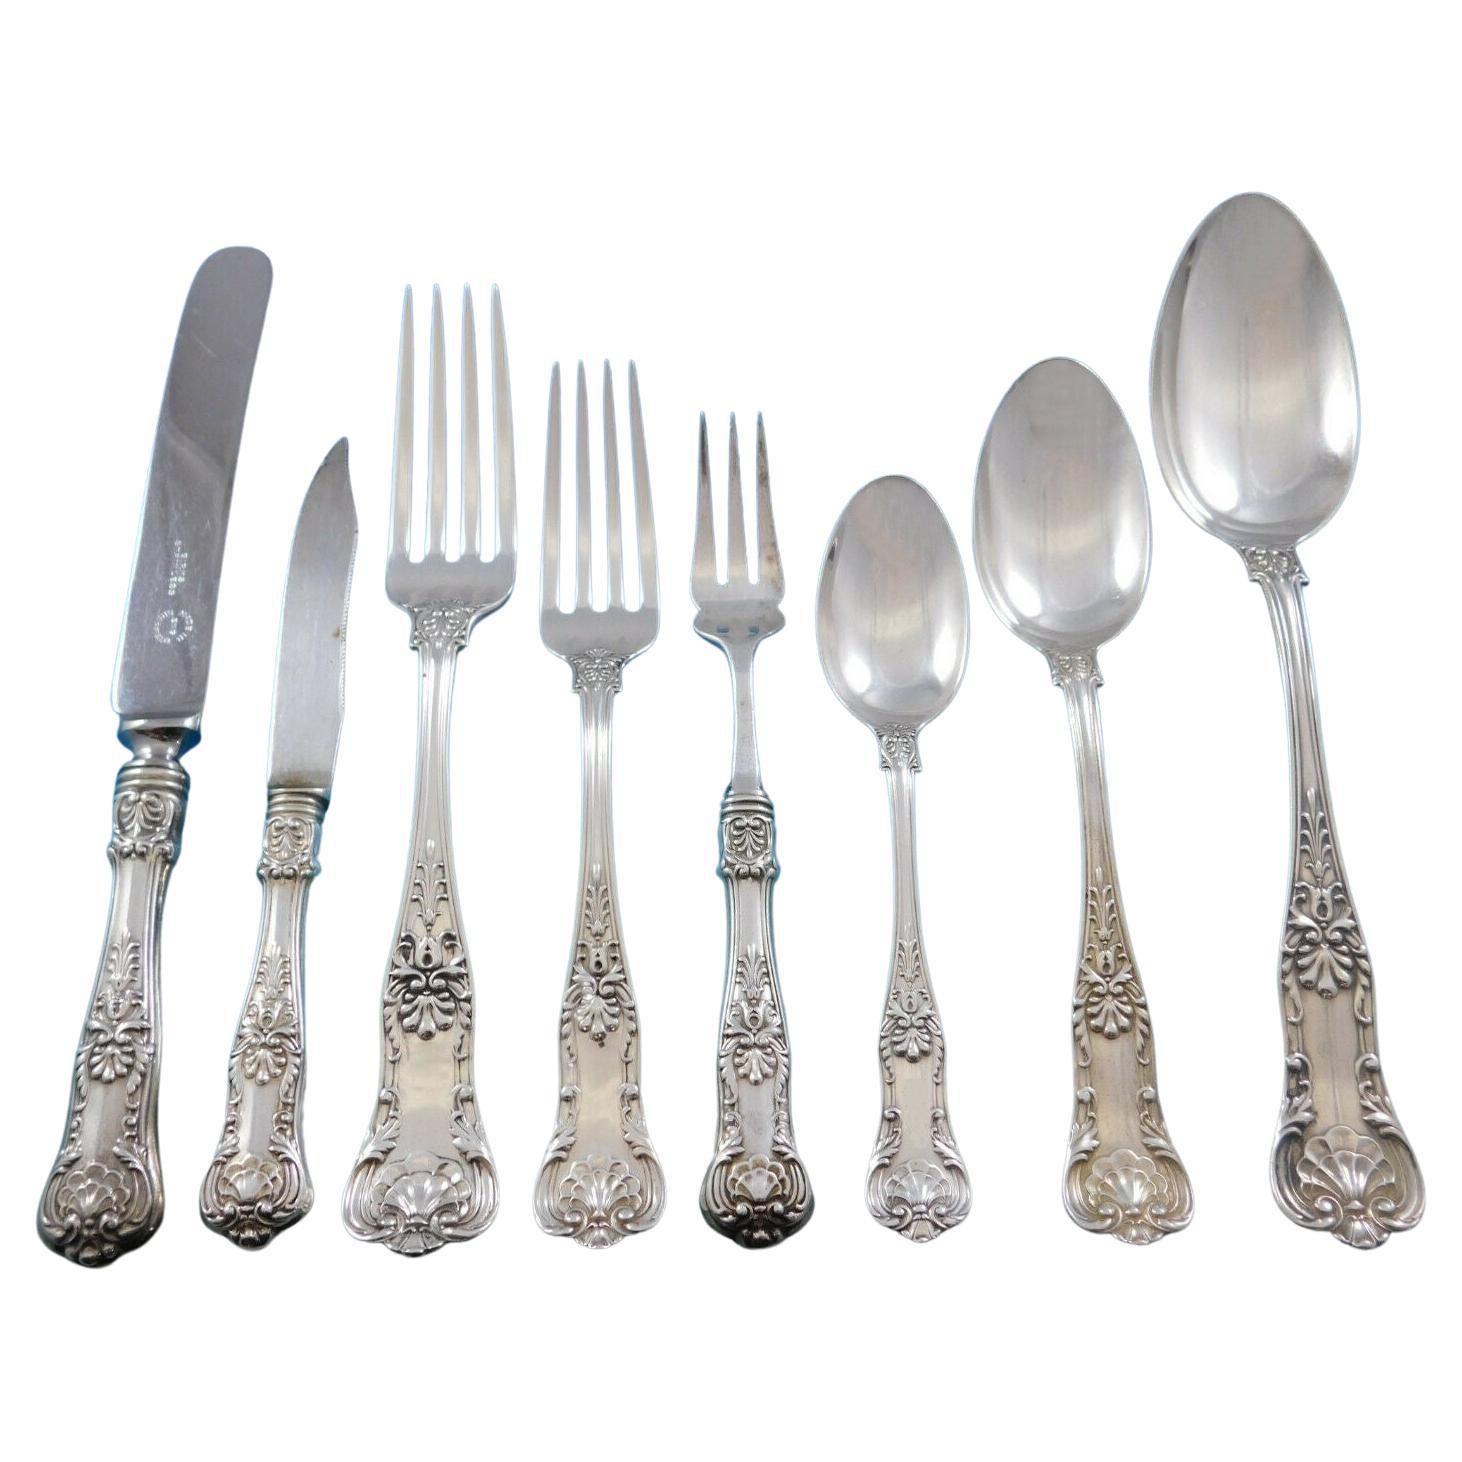 New Queens by Gorham Sterling Silver Flatware Set for 12 Service 96 Pieces Shell